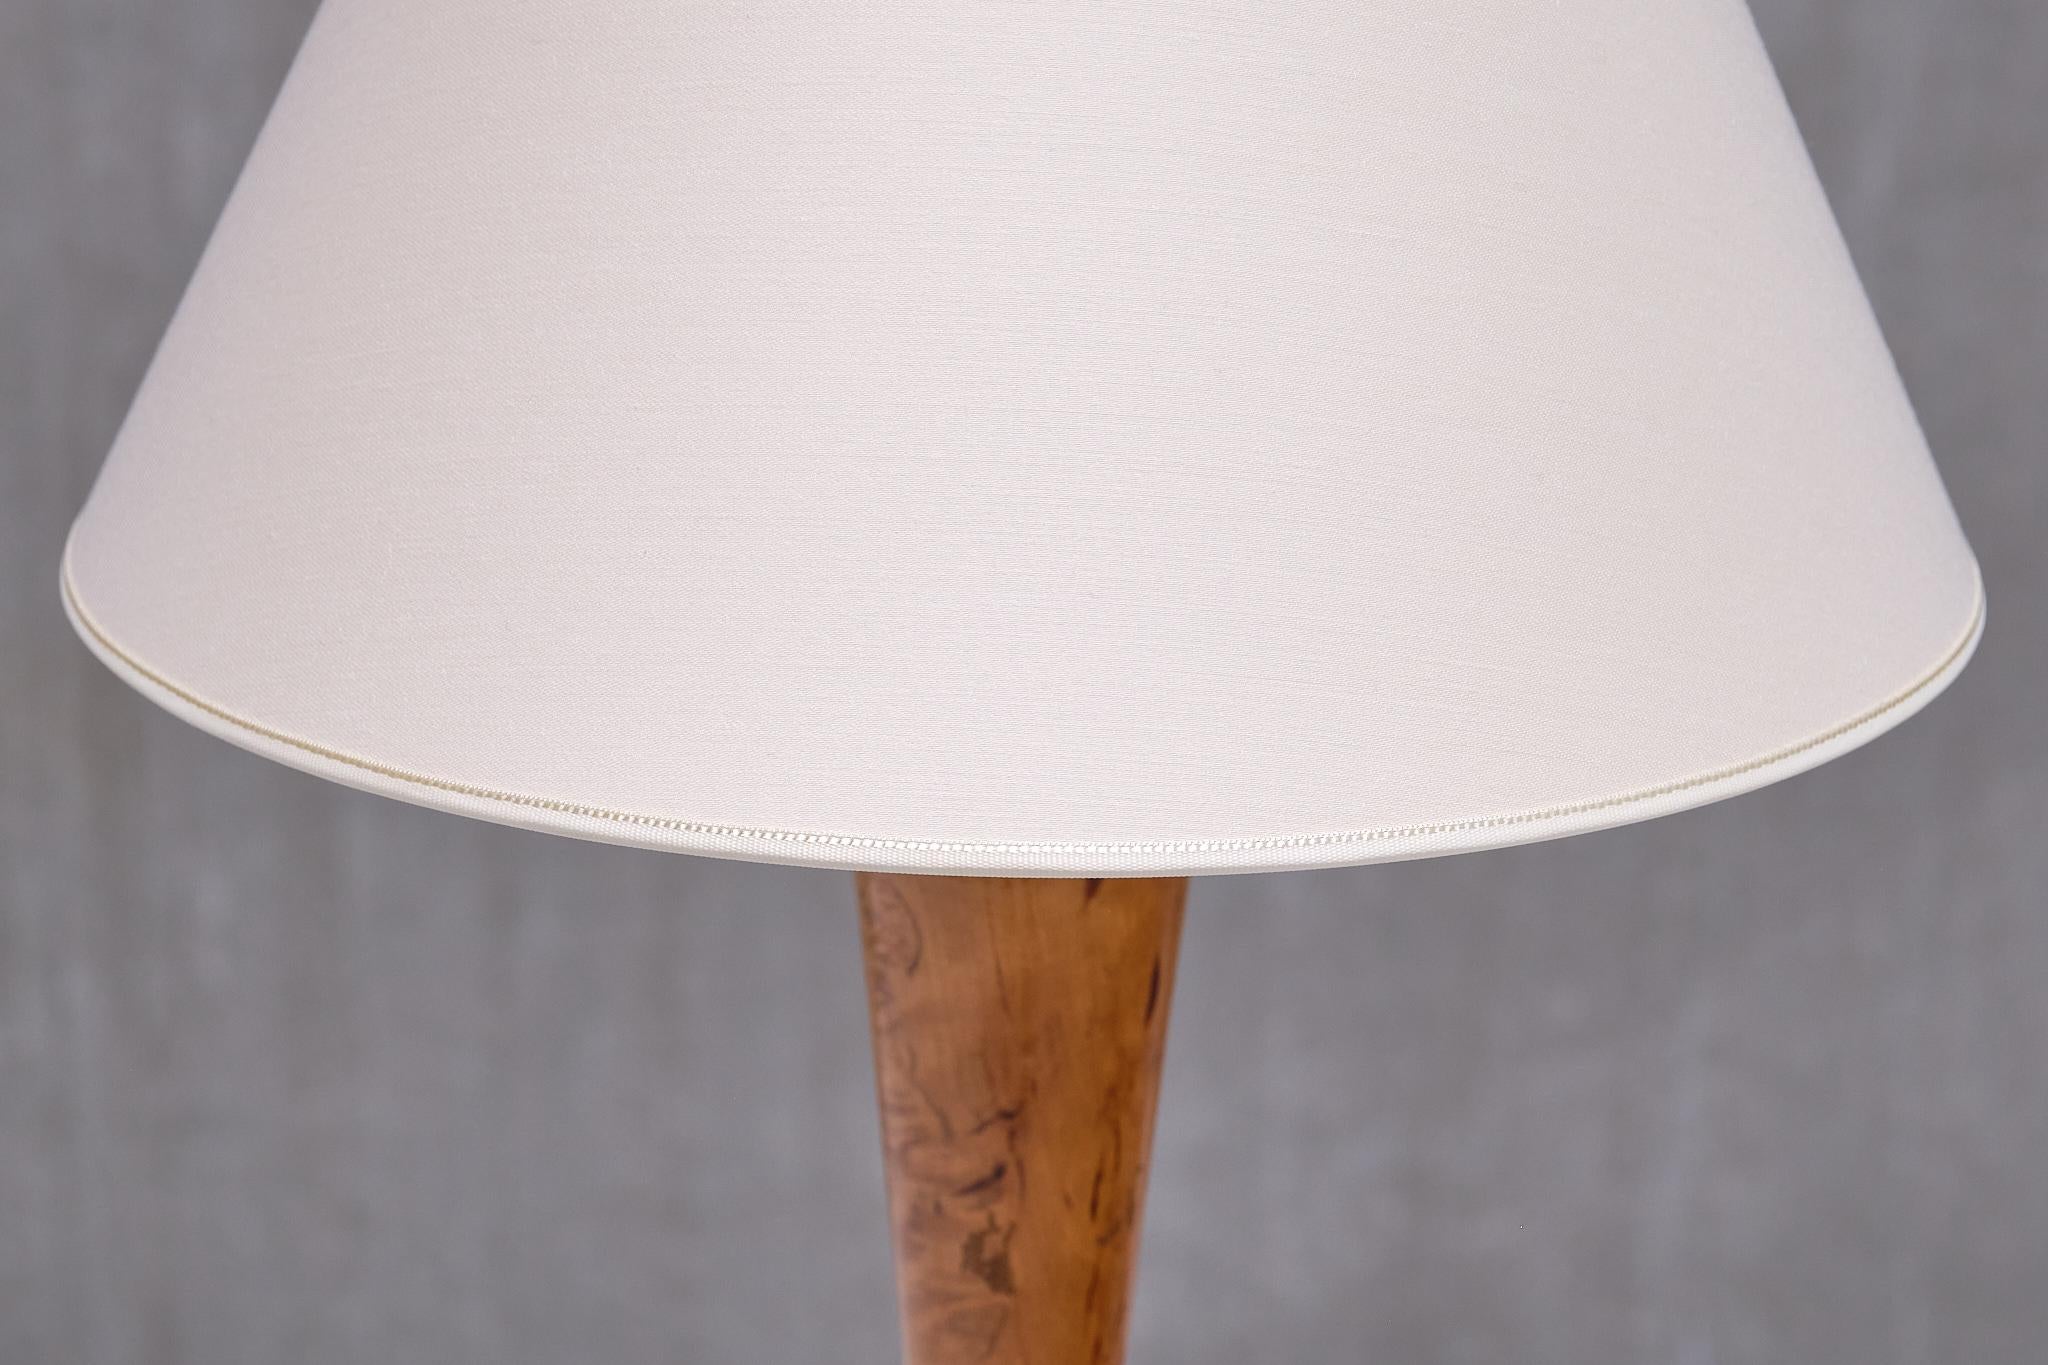 Art Deco Table Lamp in Birdseye Maple with Ivory Colored Shade, Austria, 1930s For Sale 2